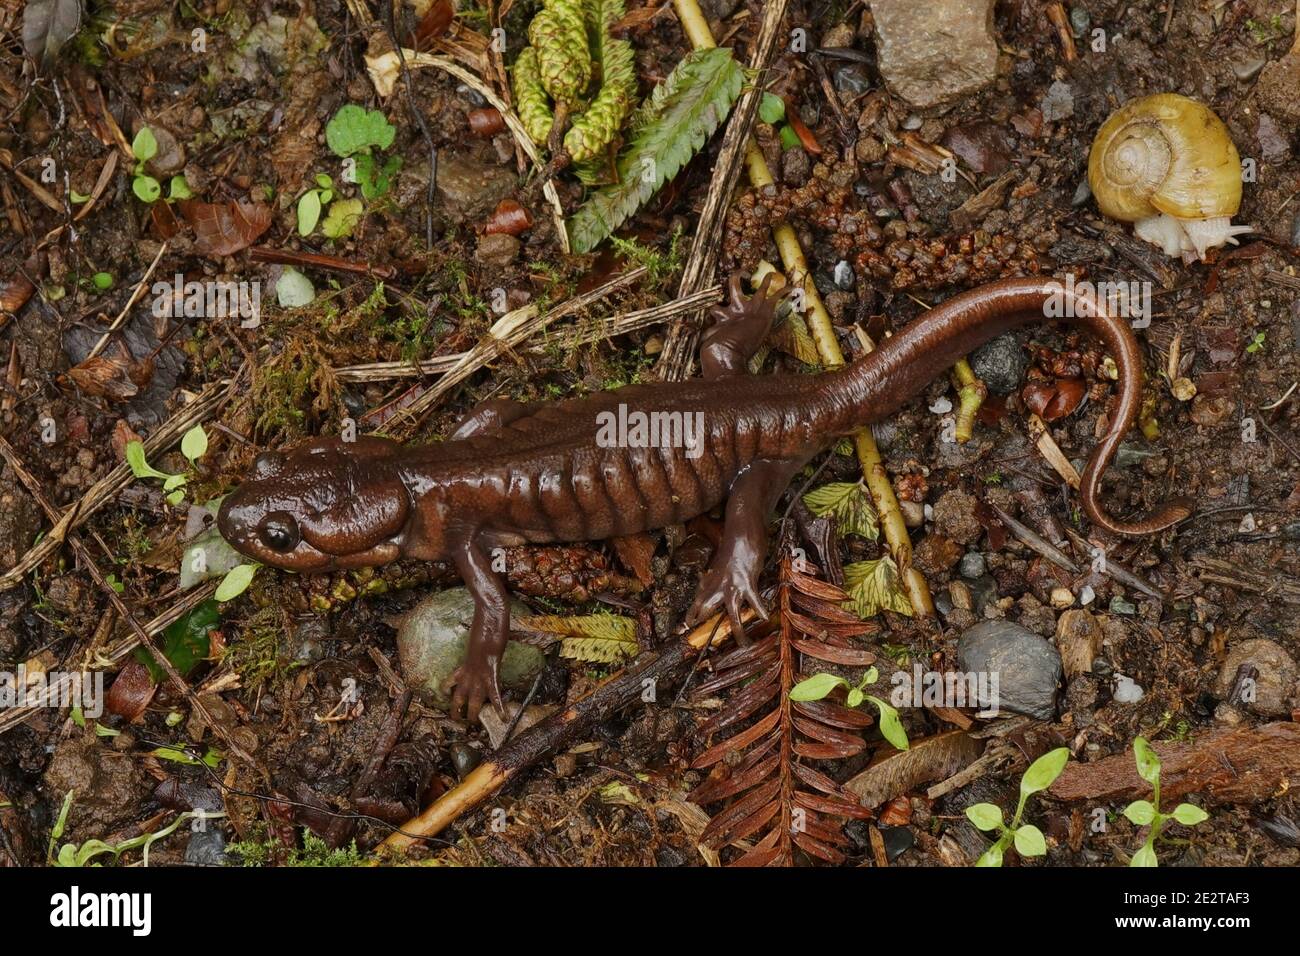 A chcolate brown adult of the Northwestern salamander, Ambystoma gracile Stock Photo